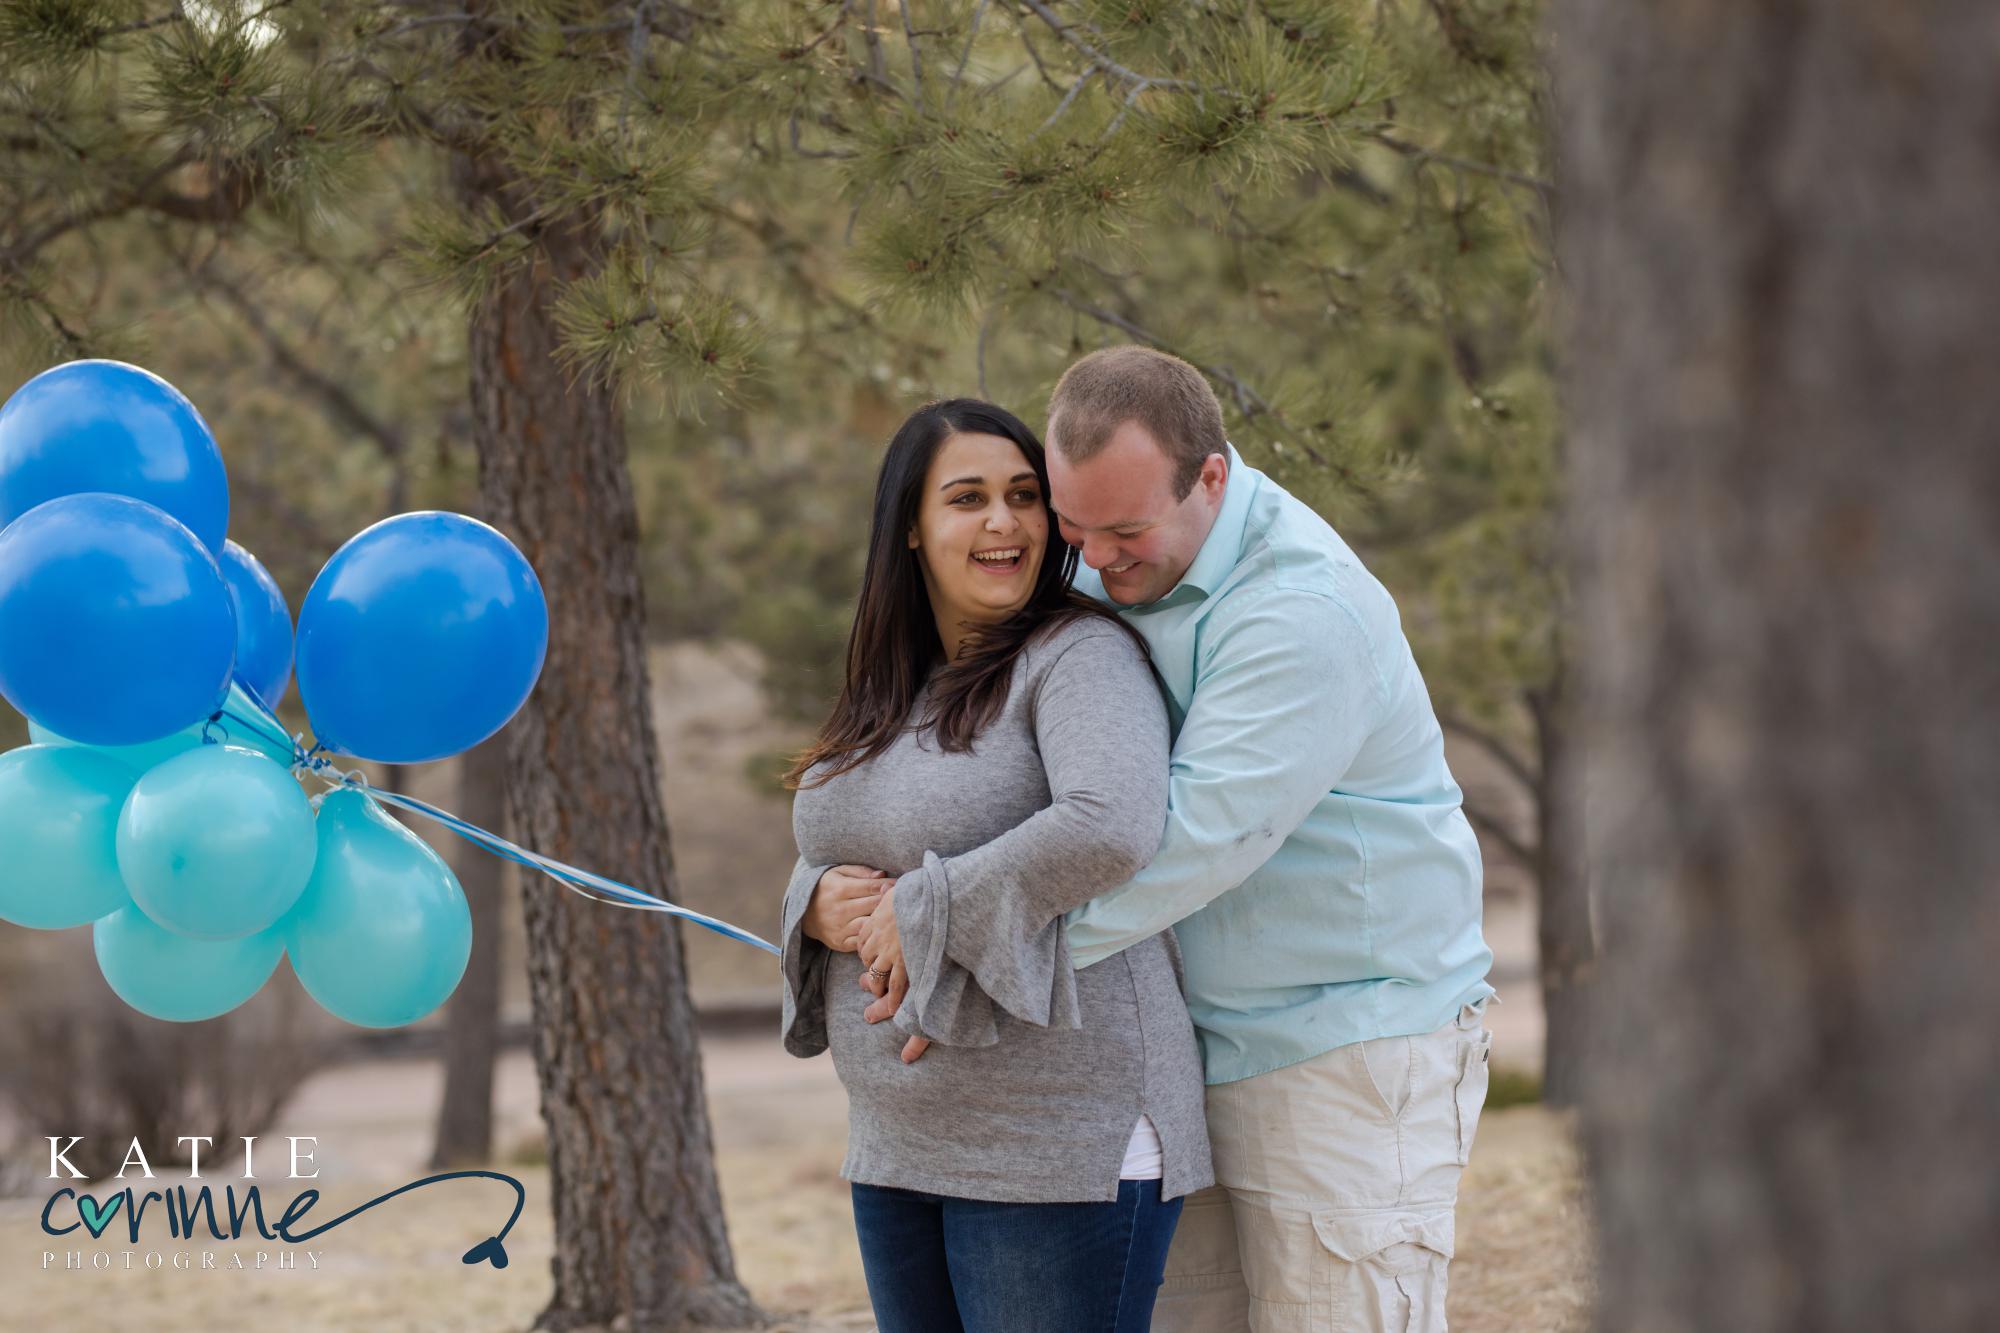 Colorado pregnant couple hold blue balloons at gender reveal